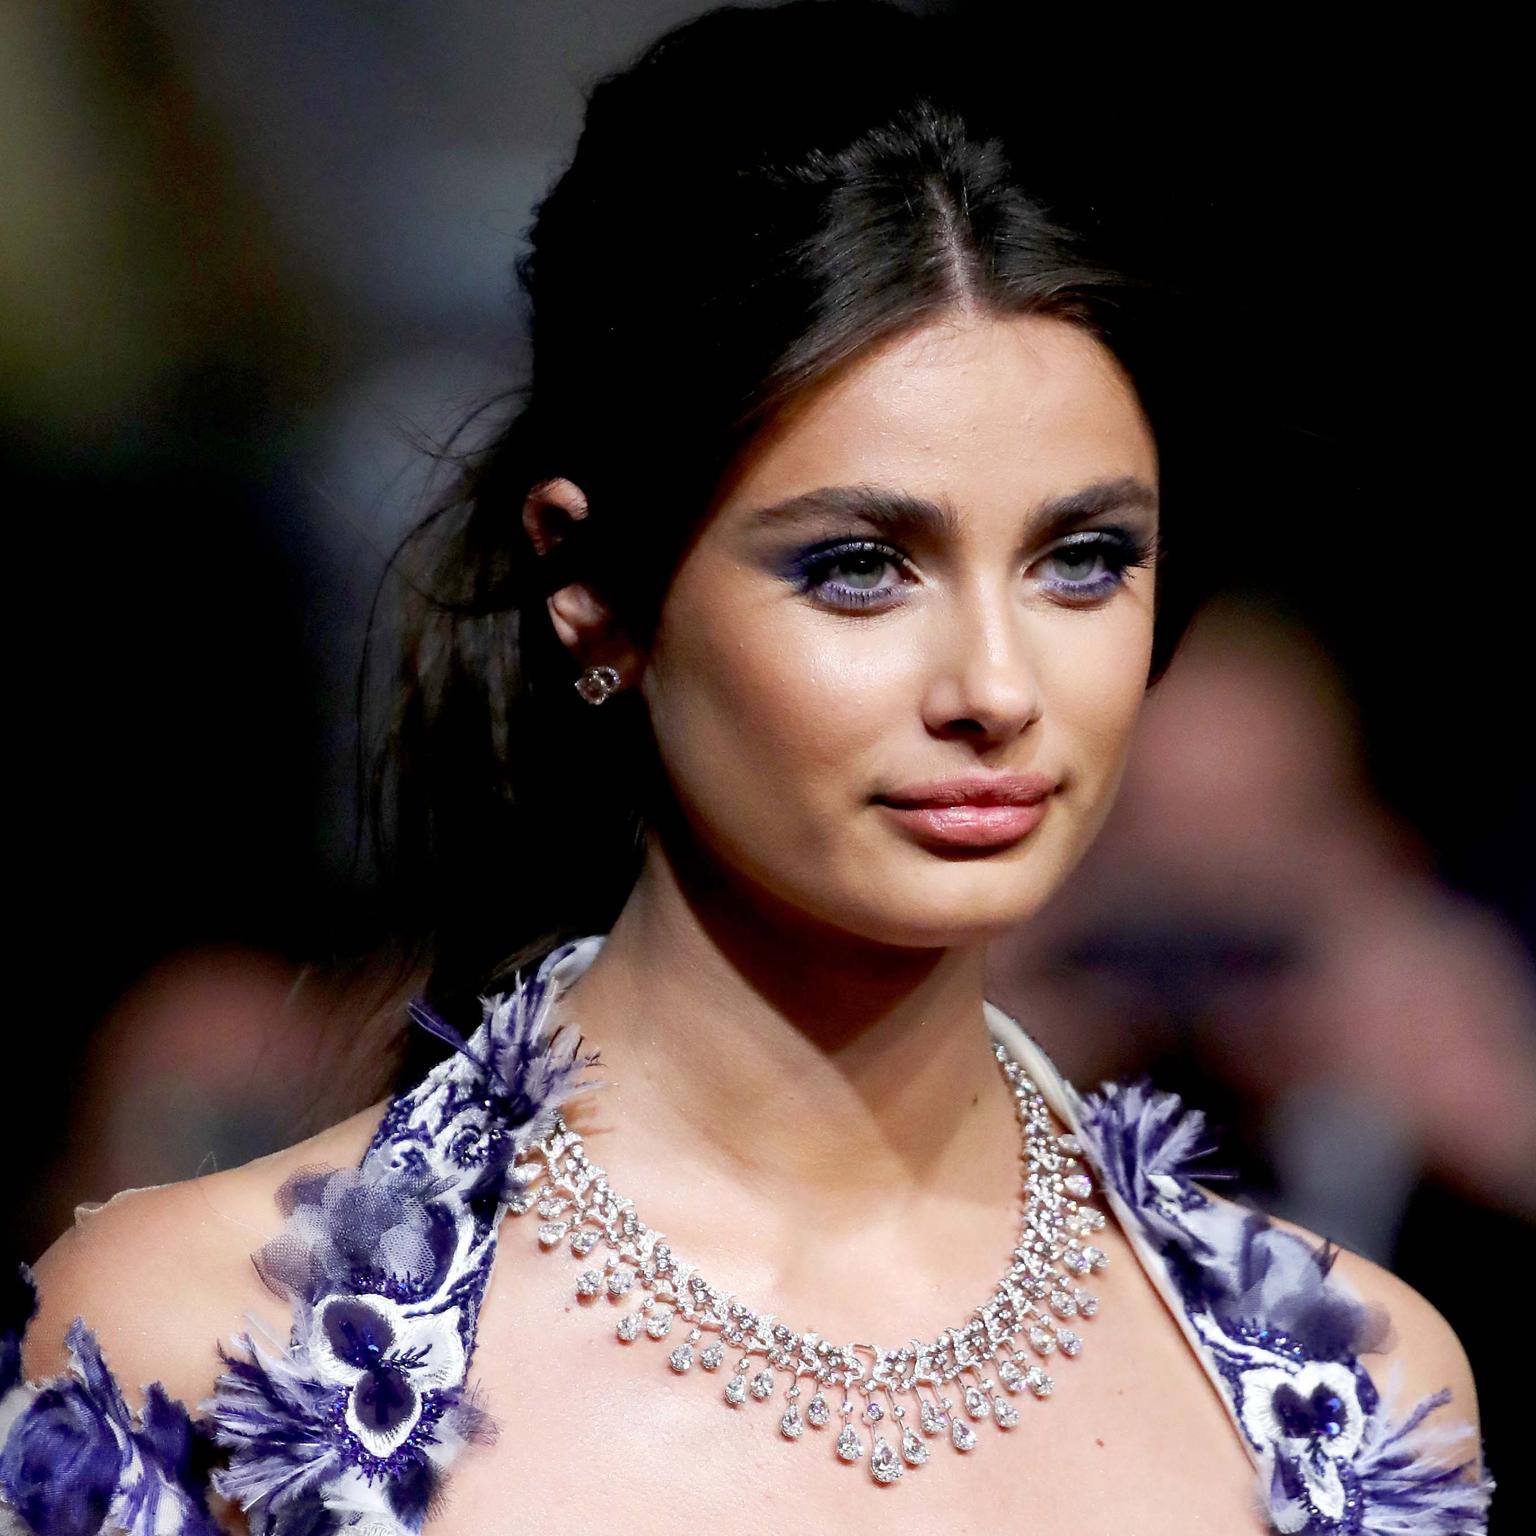 Taylor Hill in Chaumet jewels Cannes 2019